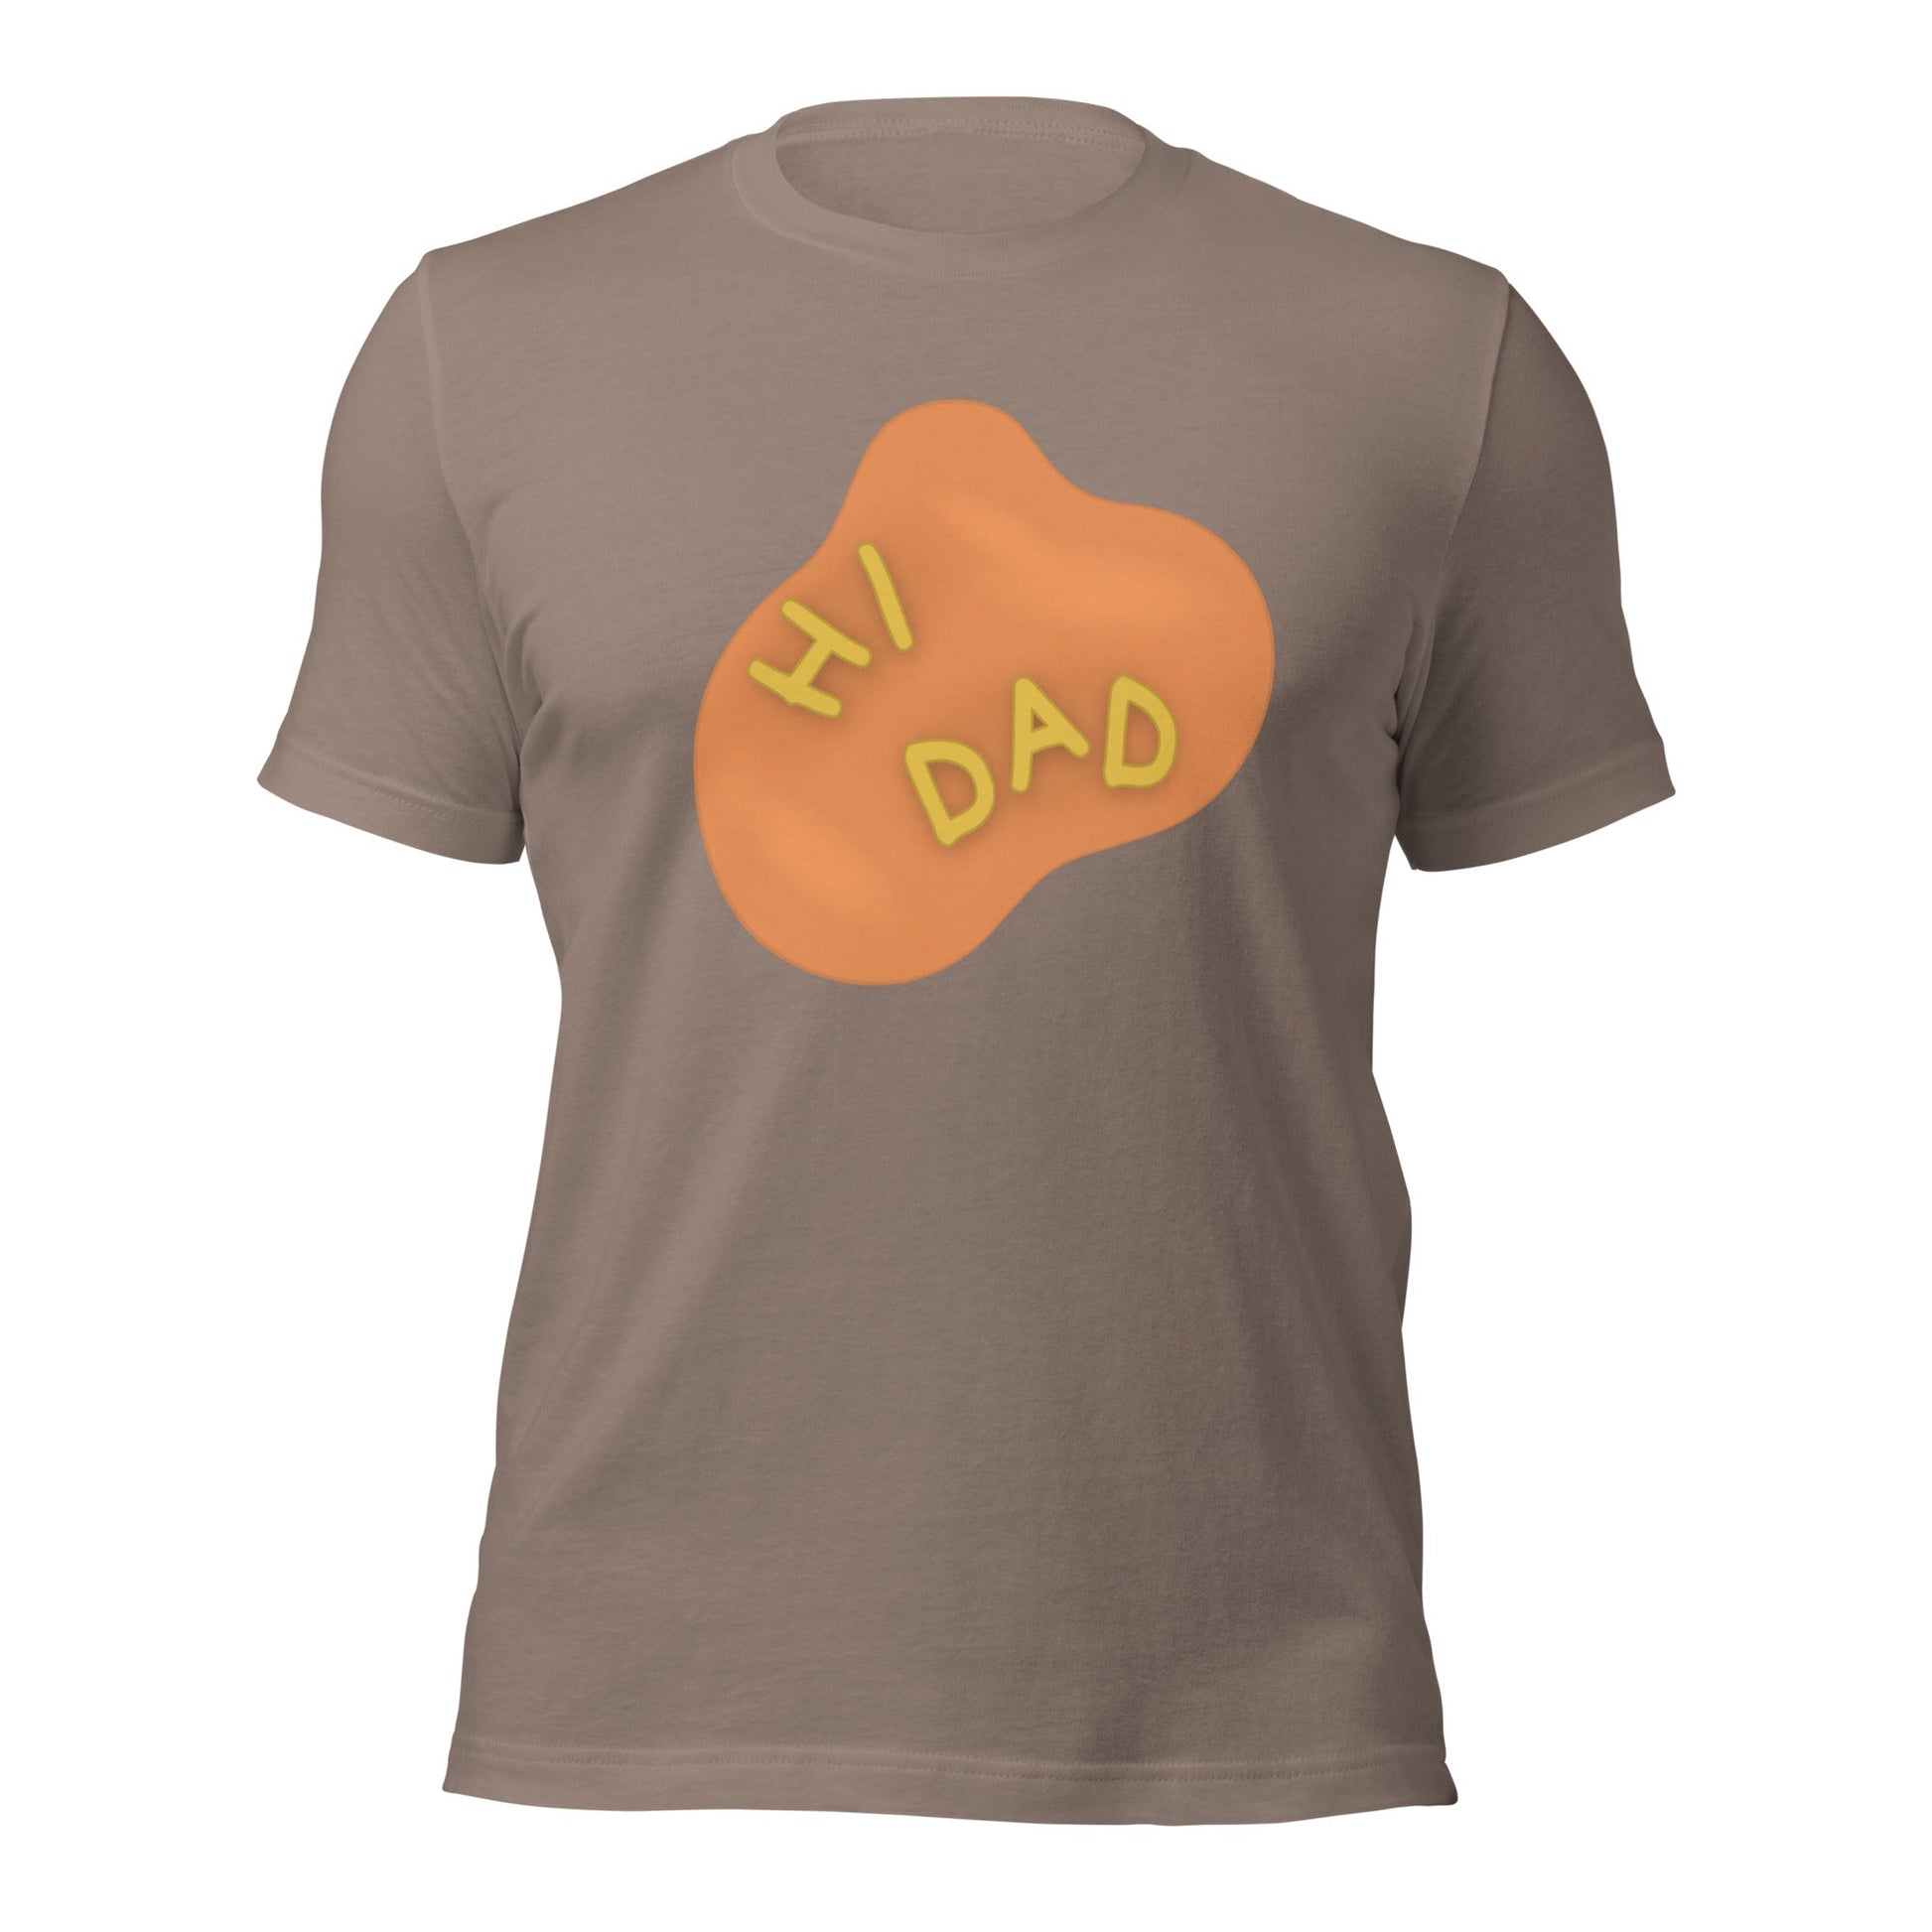 Hi Dad Soup Spill Unisex t-shirt 90s inspired90s movie kids tops90s movie top#tag4##tag5##tag6#